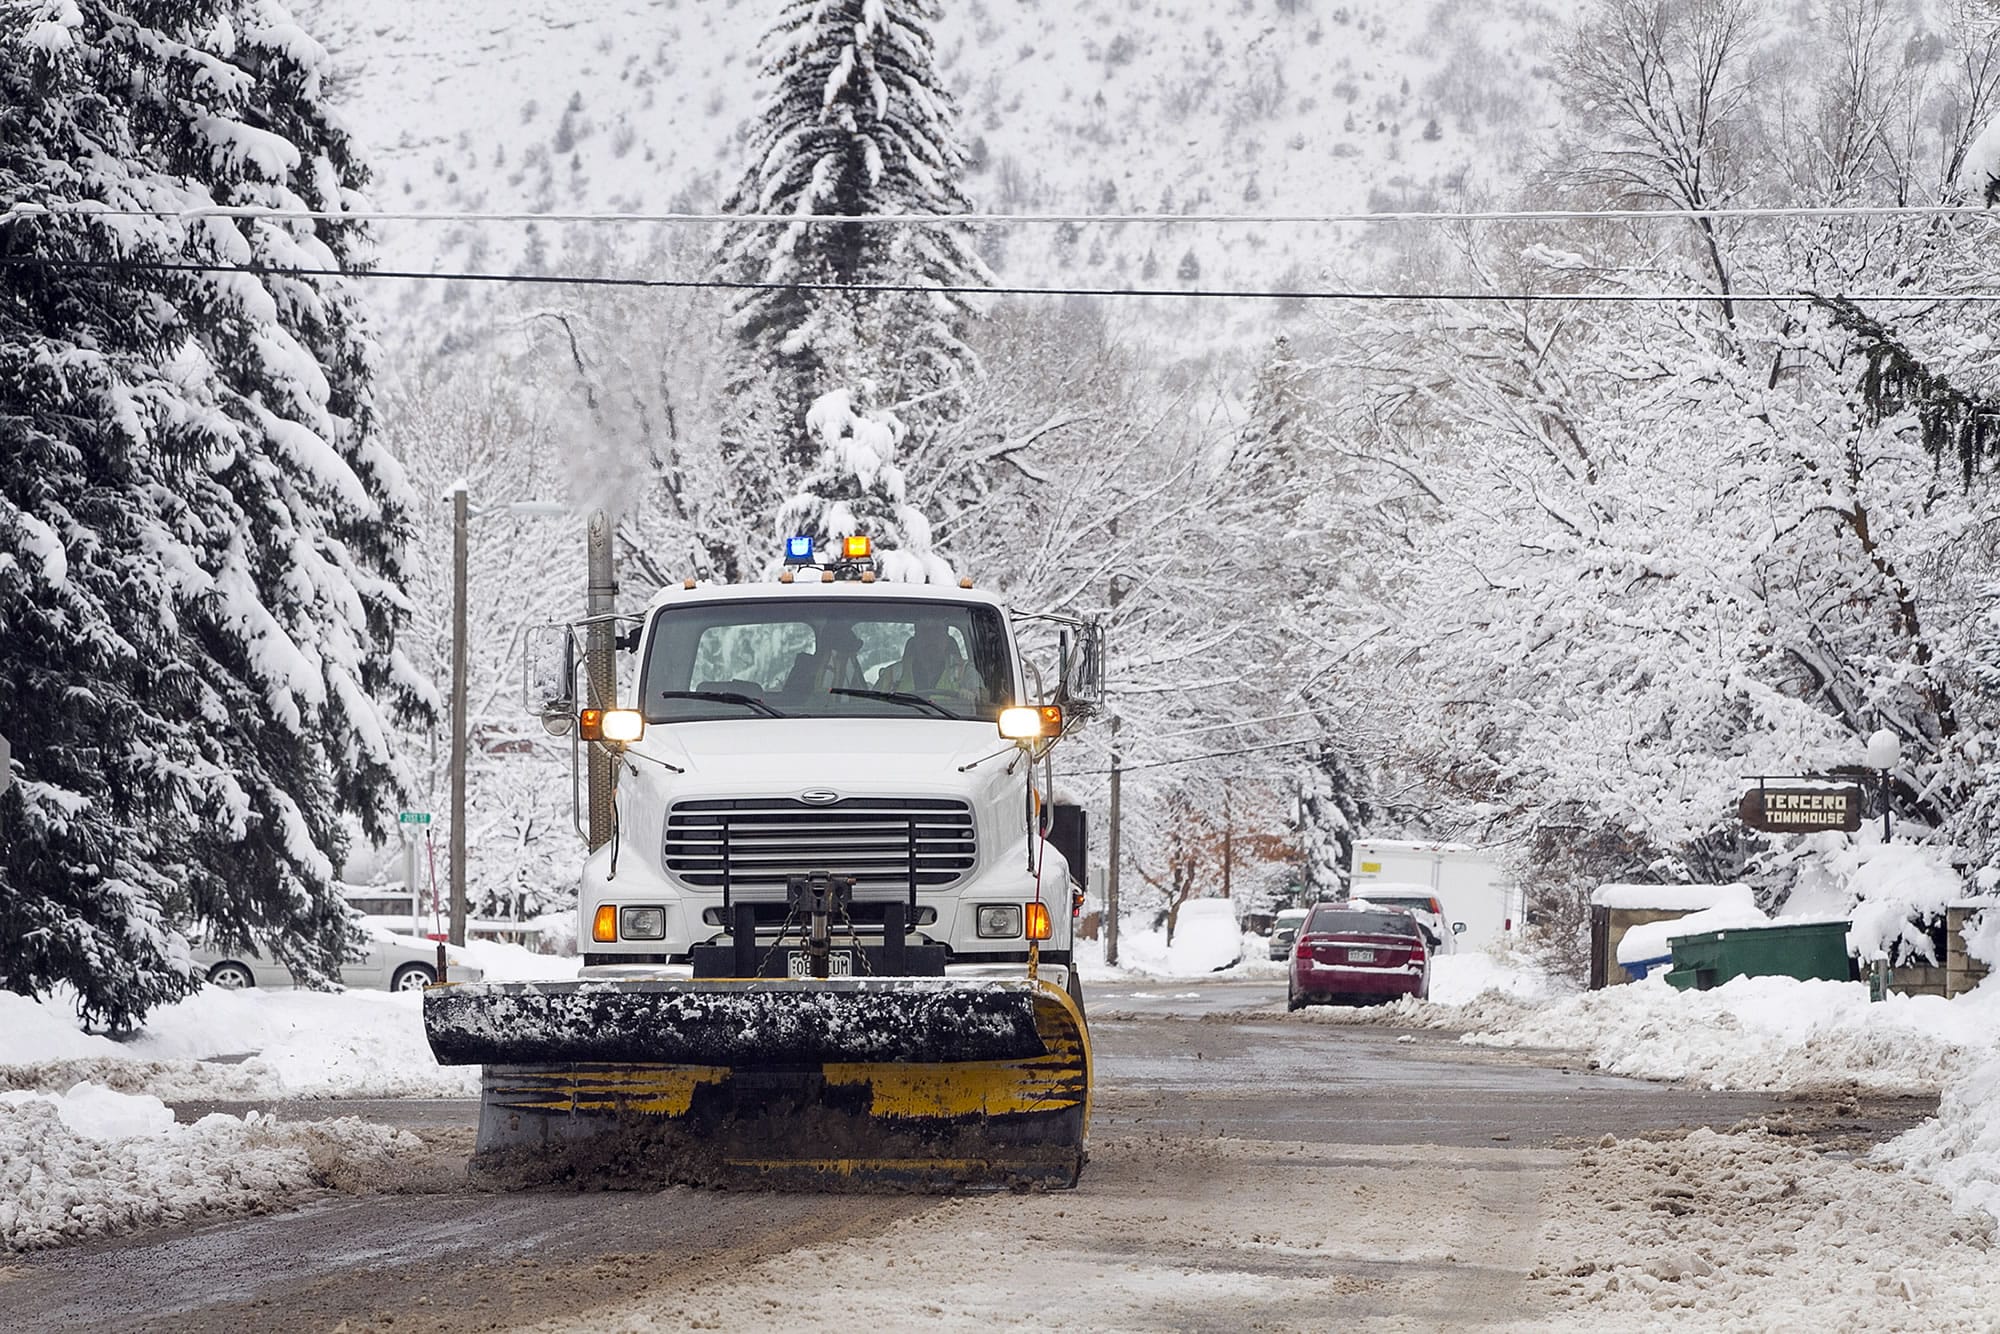 A city plow clears snow along West Third Avenue, Wednesday, Dec. 23, 2015, in Durango, Colo., after a winter storm swept through the region.